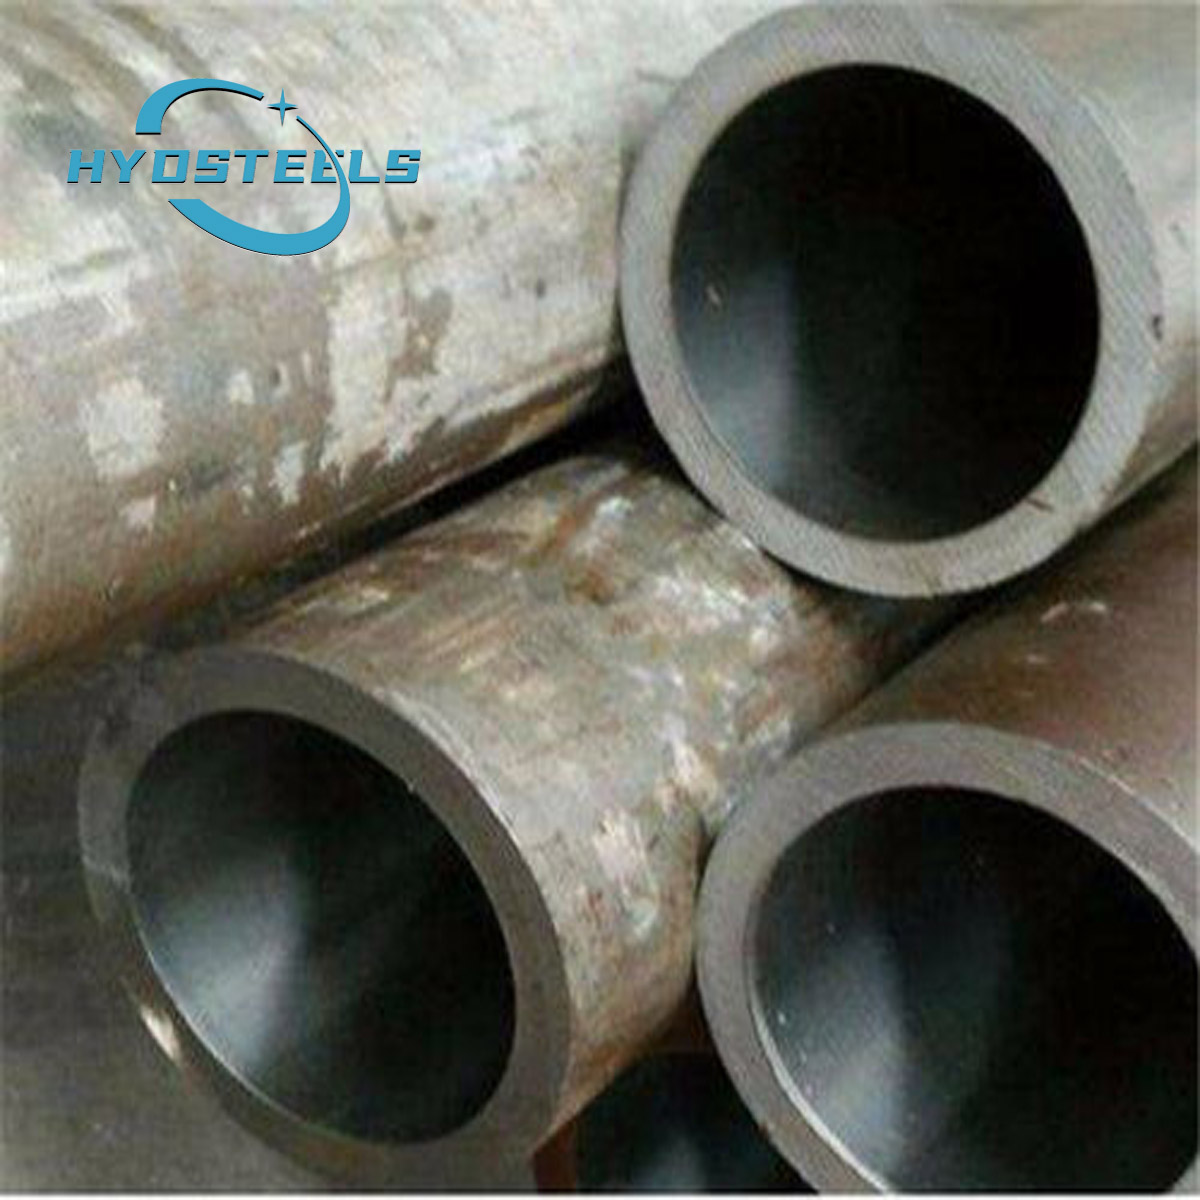 ST52 C20 Seamless Steel Honed Hydraulic Cylinder Tube Material